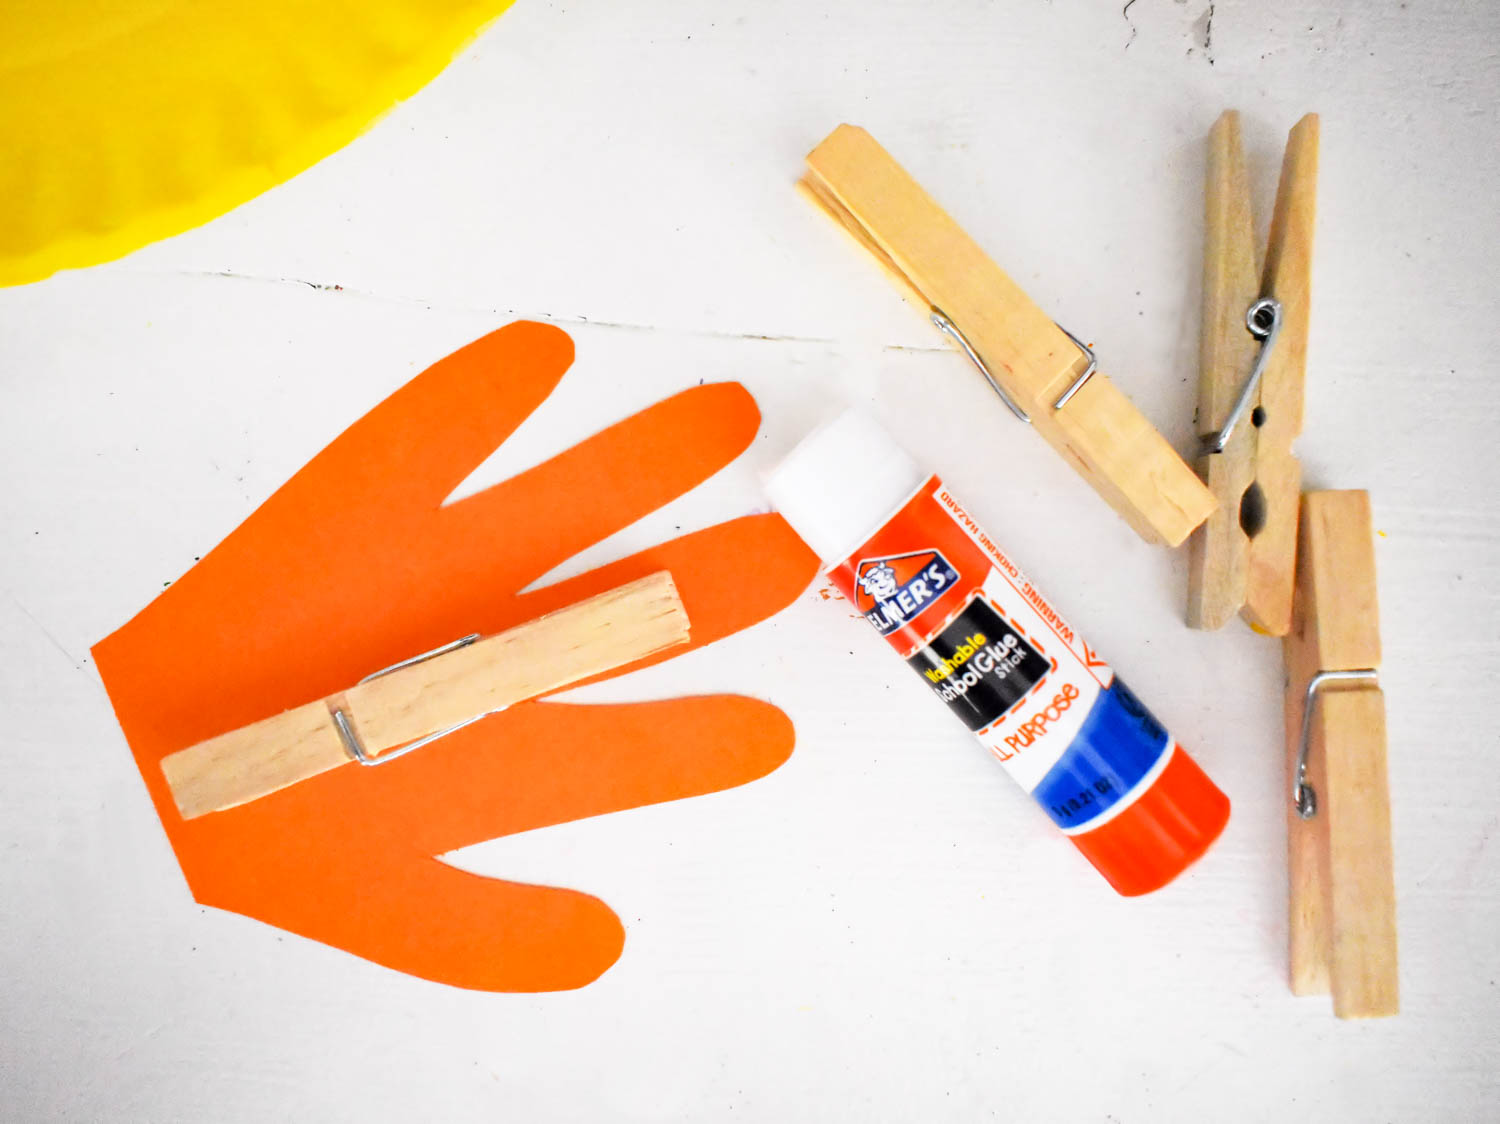 Glue the handprints to two of the painted clothespins